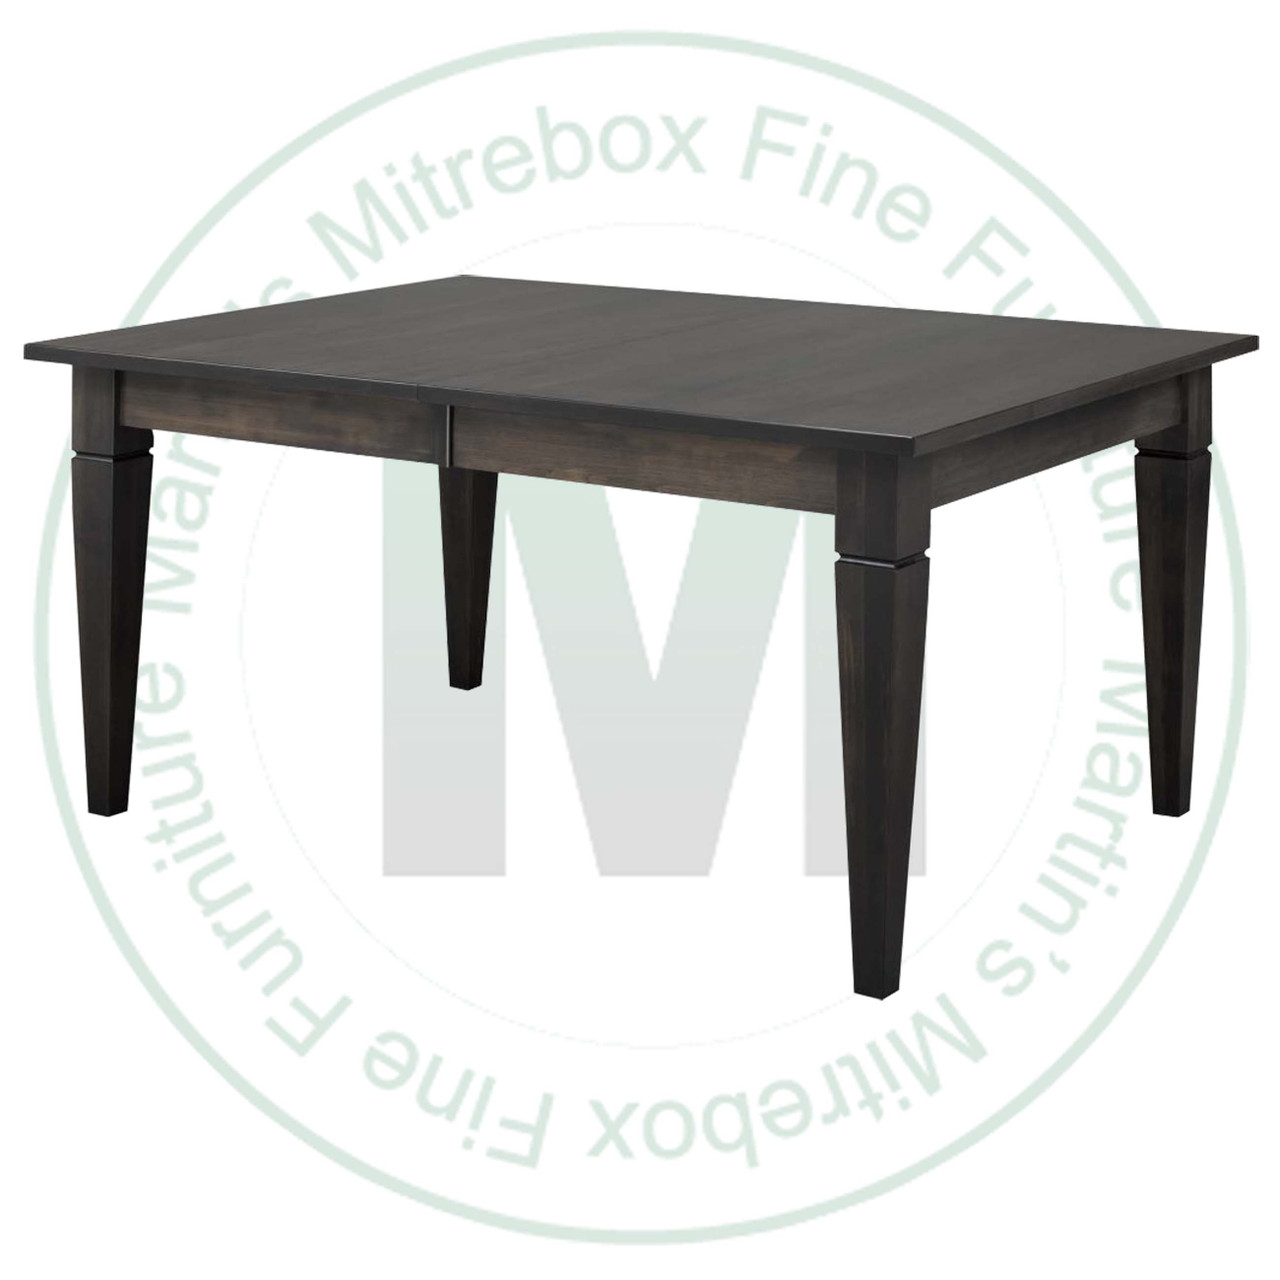 Maple Reesor Extension Harvest Table 36''D x 48''W x 30''H With 2 - 12'' Leaves Table Has 1'' Thick Top